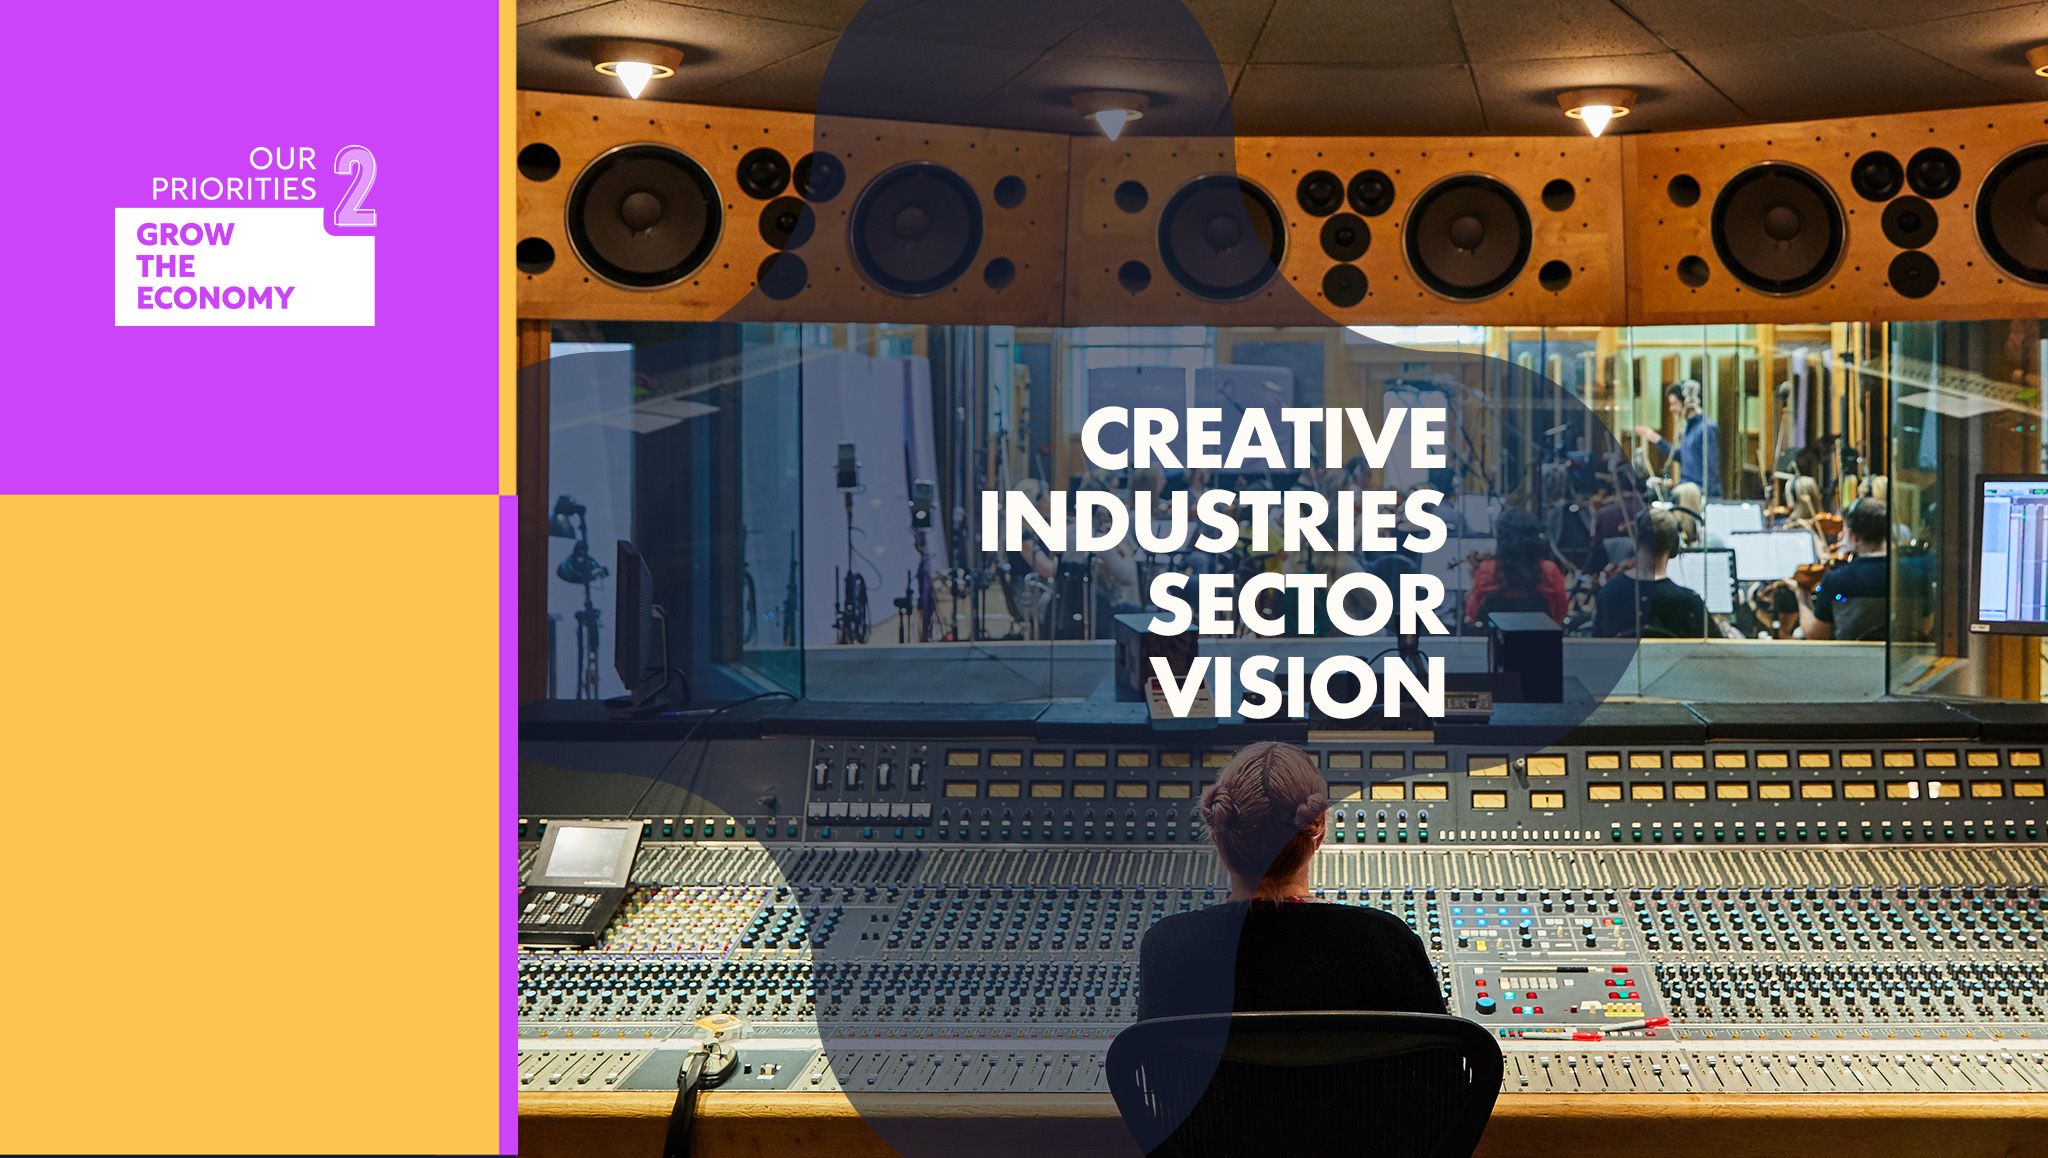 Creative Industries Sector Vision graphic